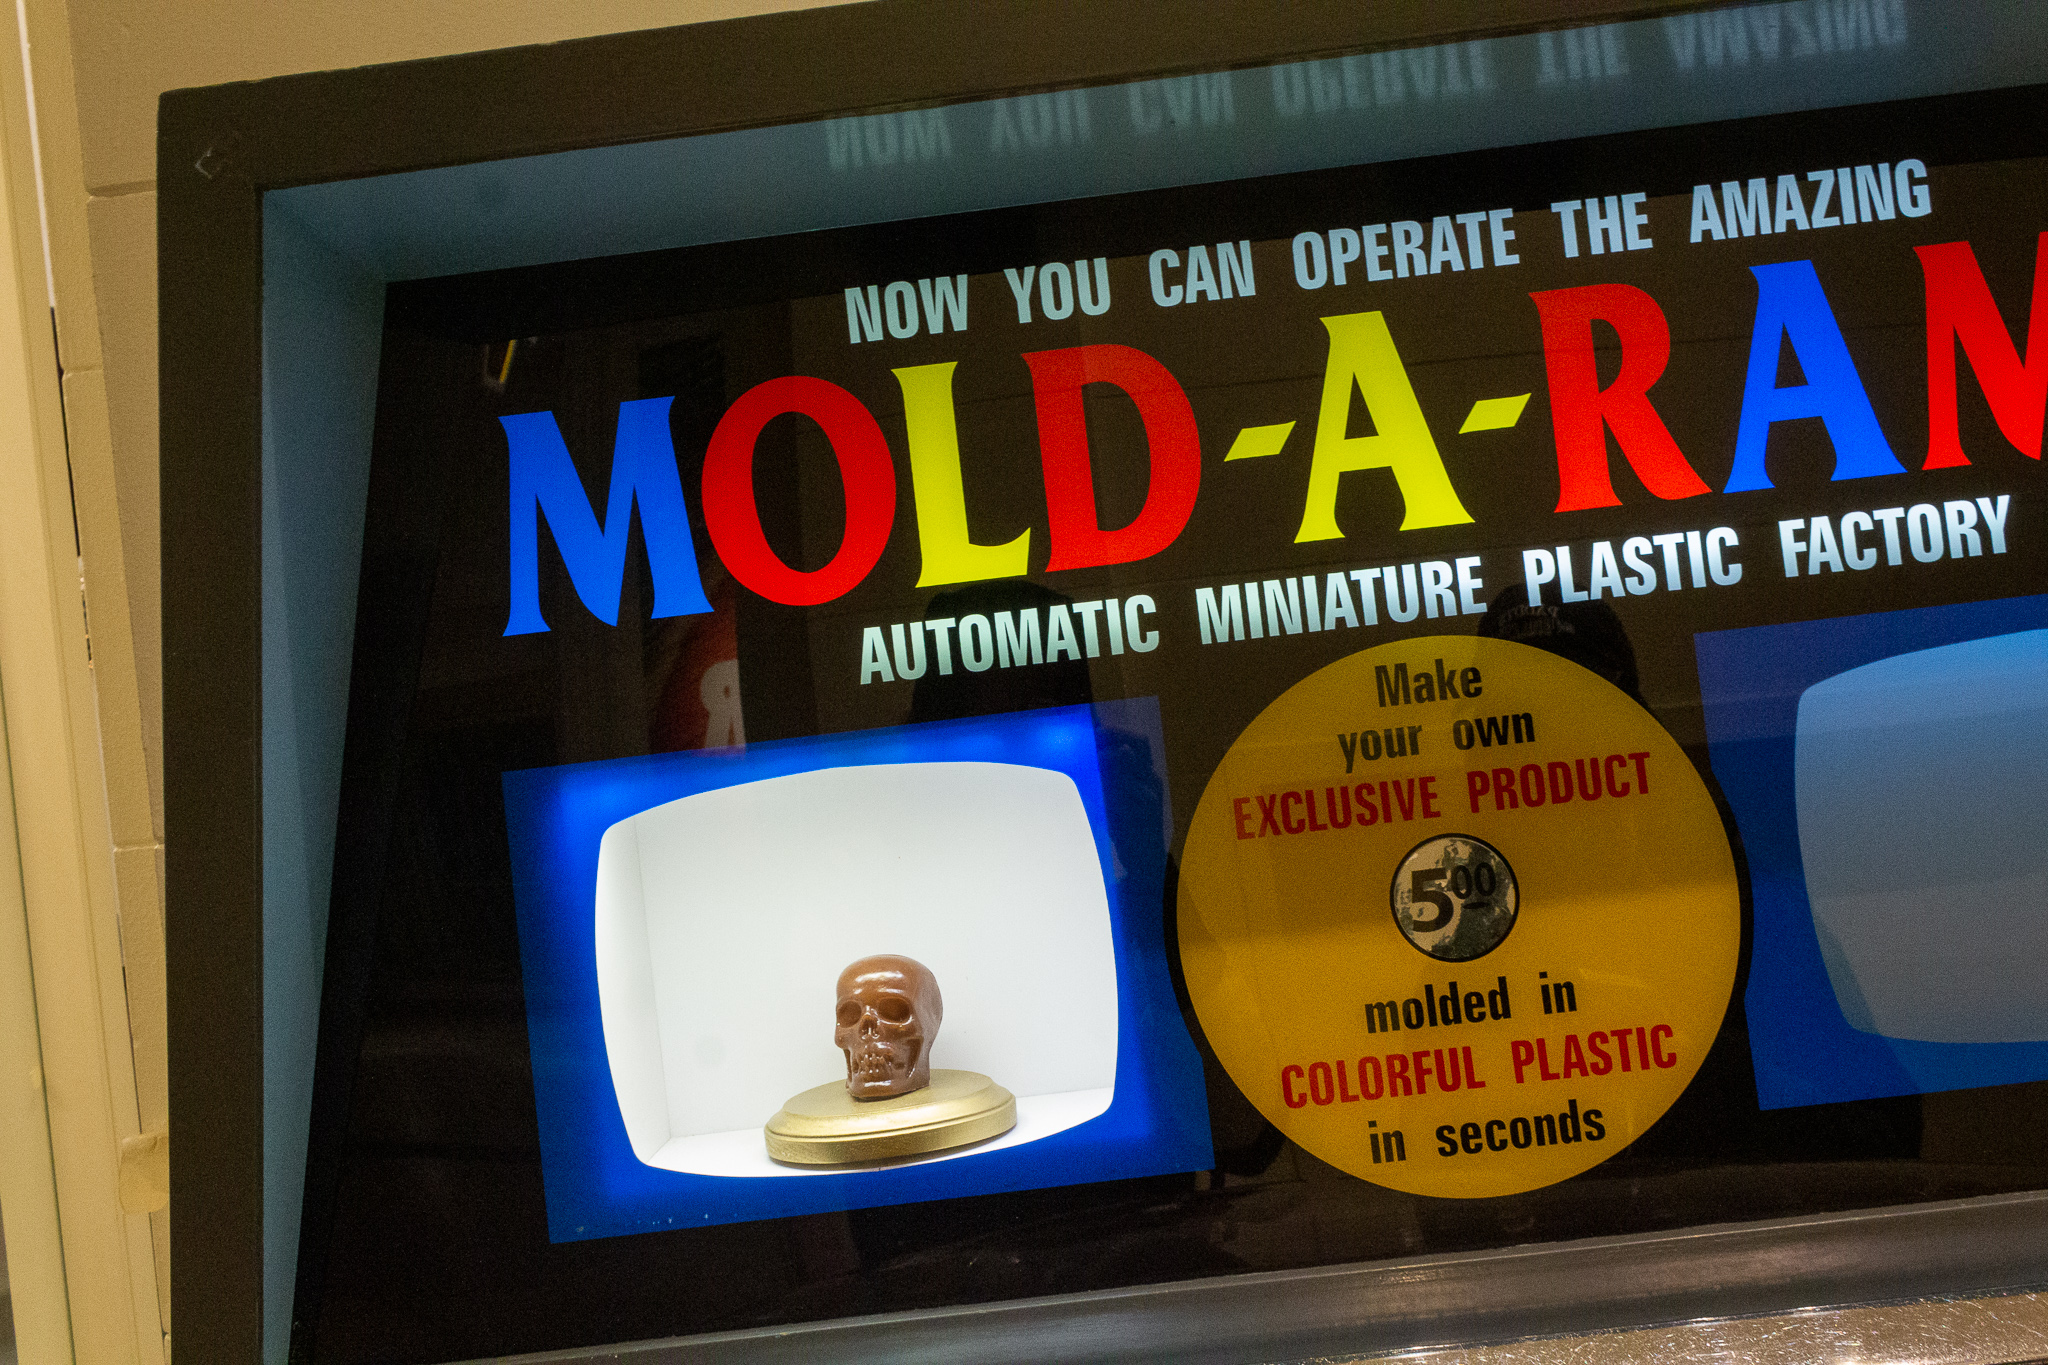 The top portion of a Mold-A-Rama plastic injection machine displaying a small brown skull as example plastic figure